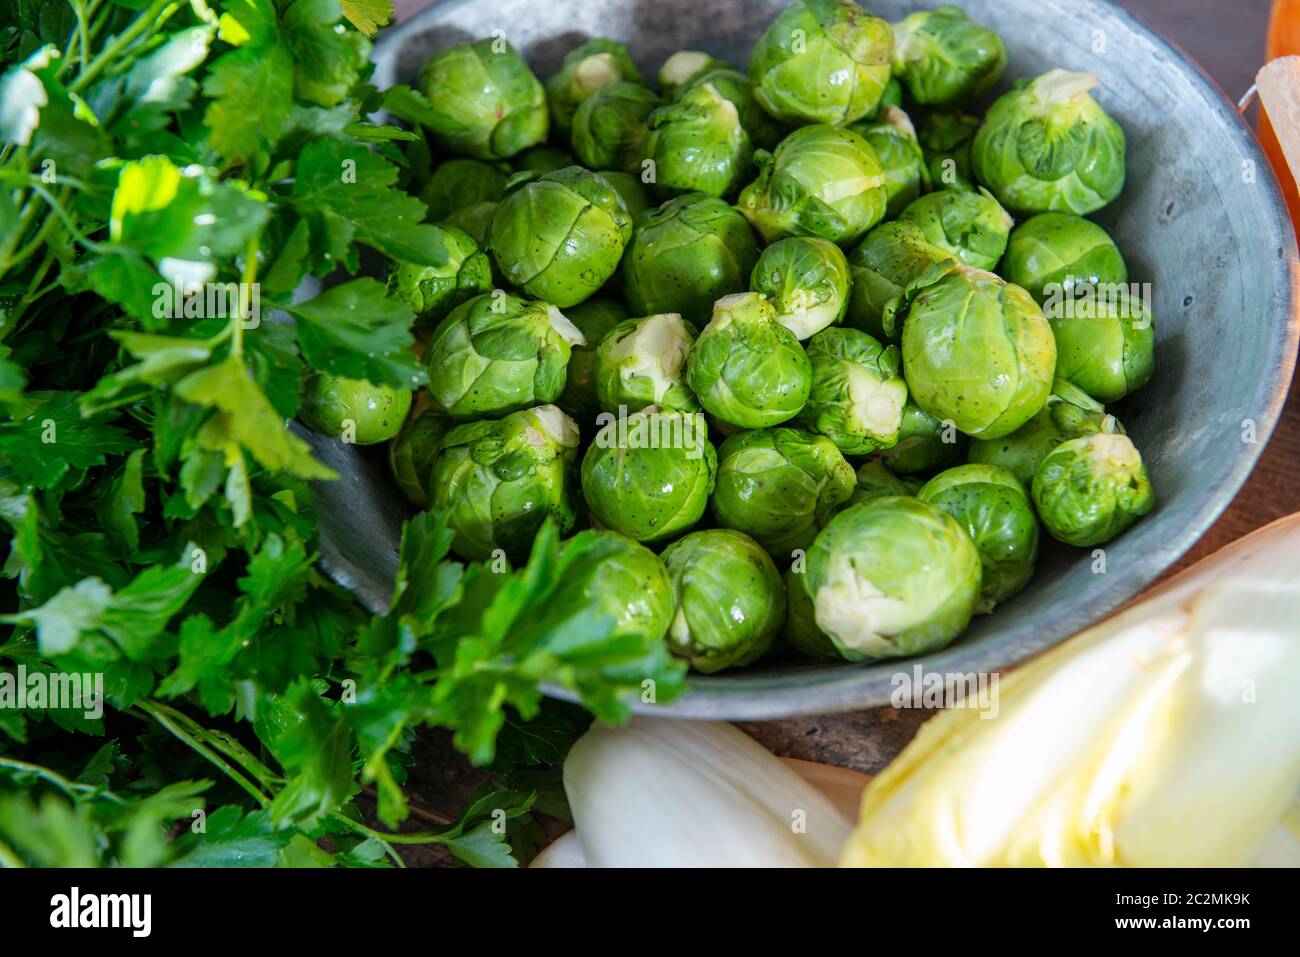 a group of fresh raw brussels sprouts Stock Photo